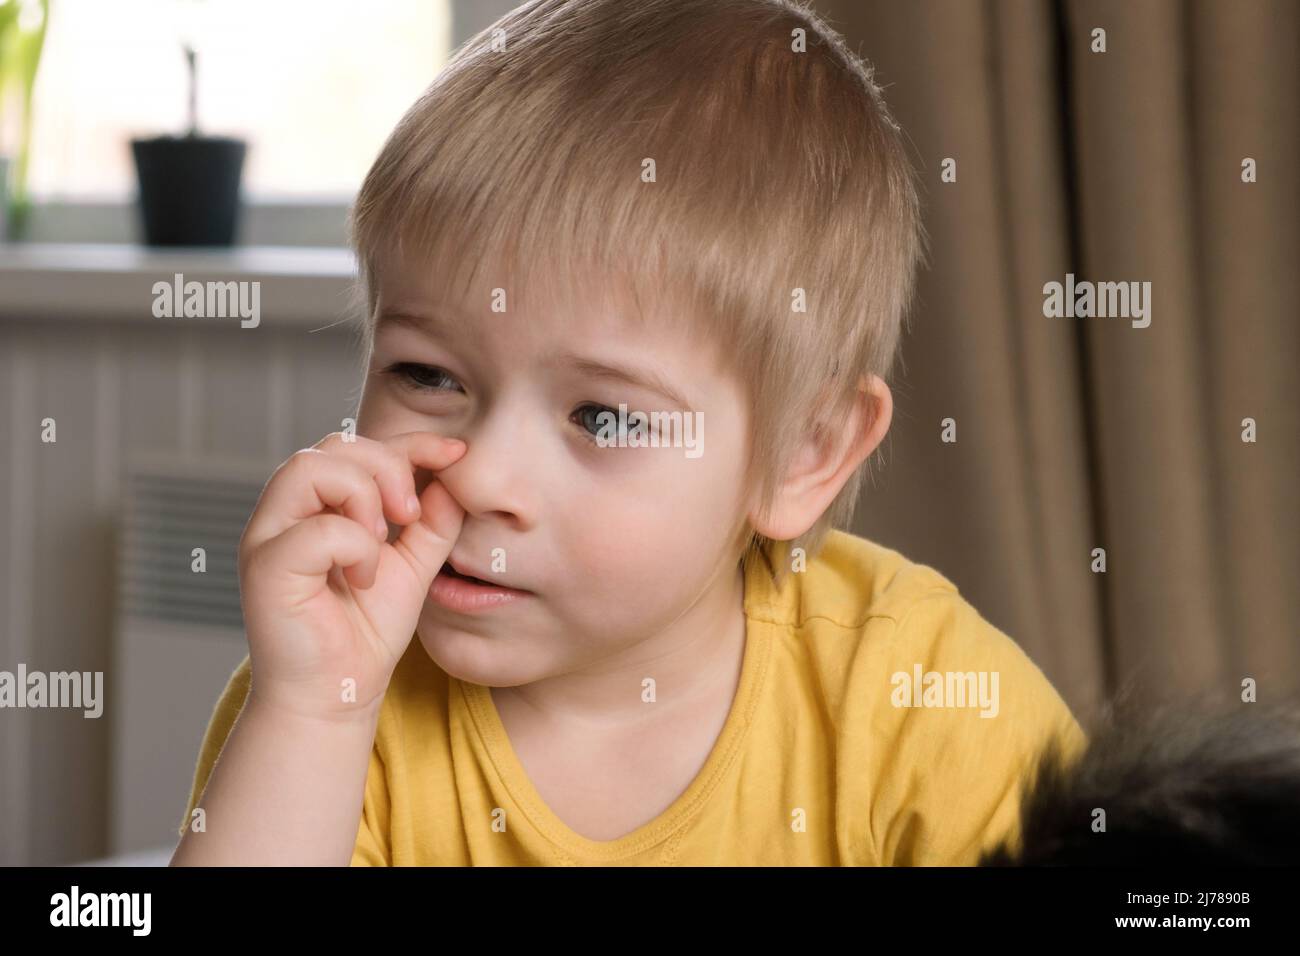 Child boy with blonde hair baby with finger in his nose. Portrait 3 years old kid picking nose. Boy toddler at home. Early age children development. Stock Photo